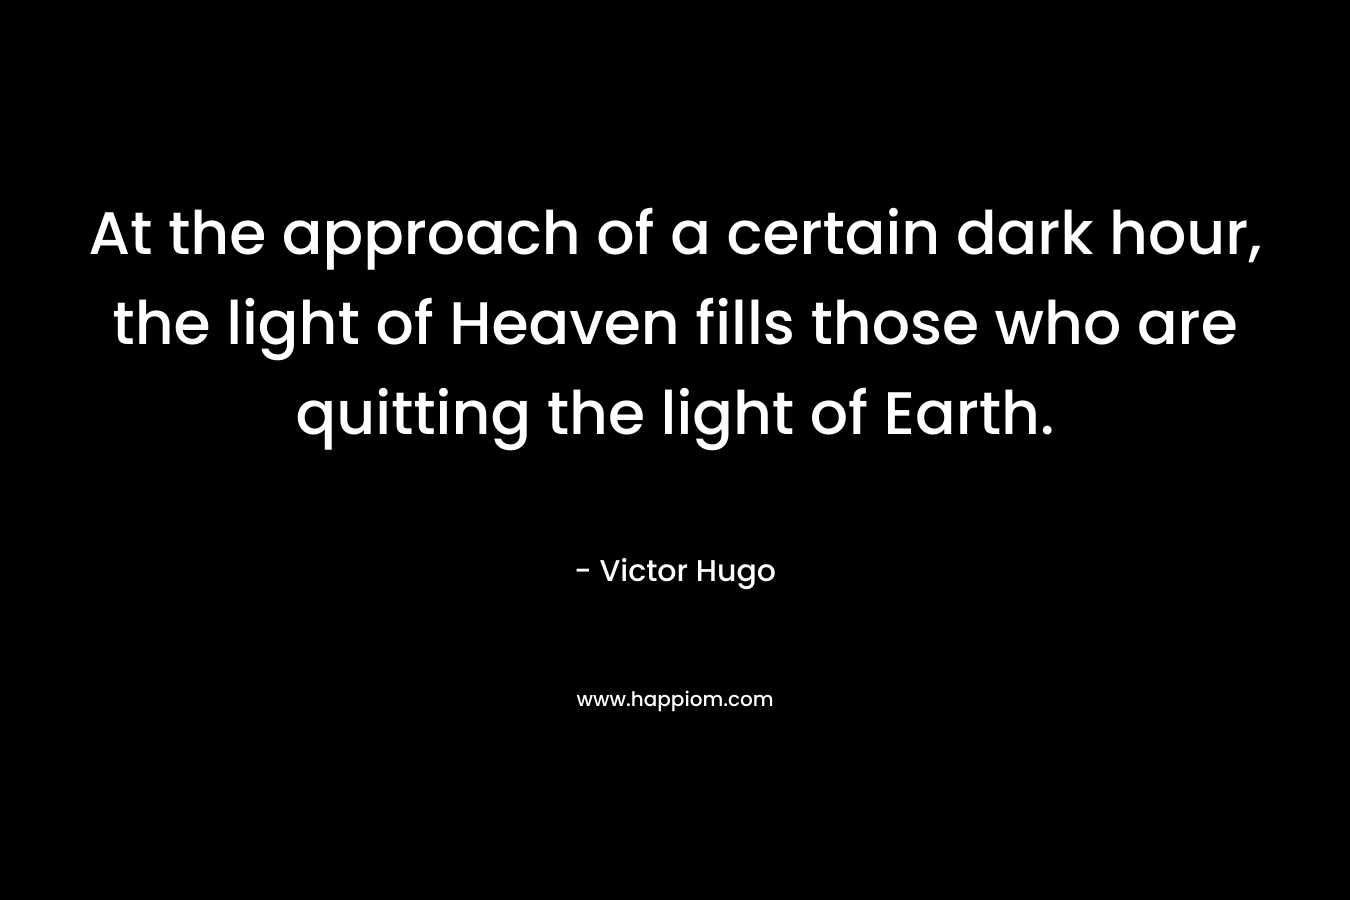 At the approach of a certain dark hour, the light of Heaven fills those who are quitting the light of Earth.